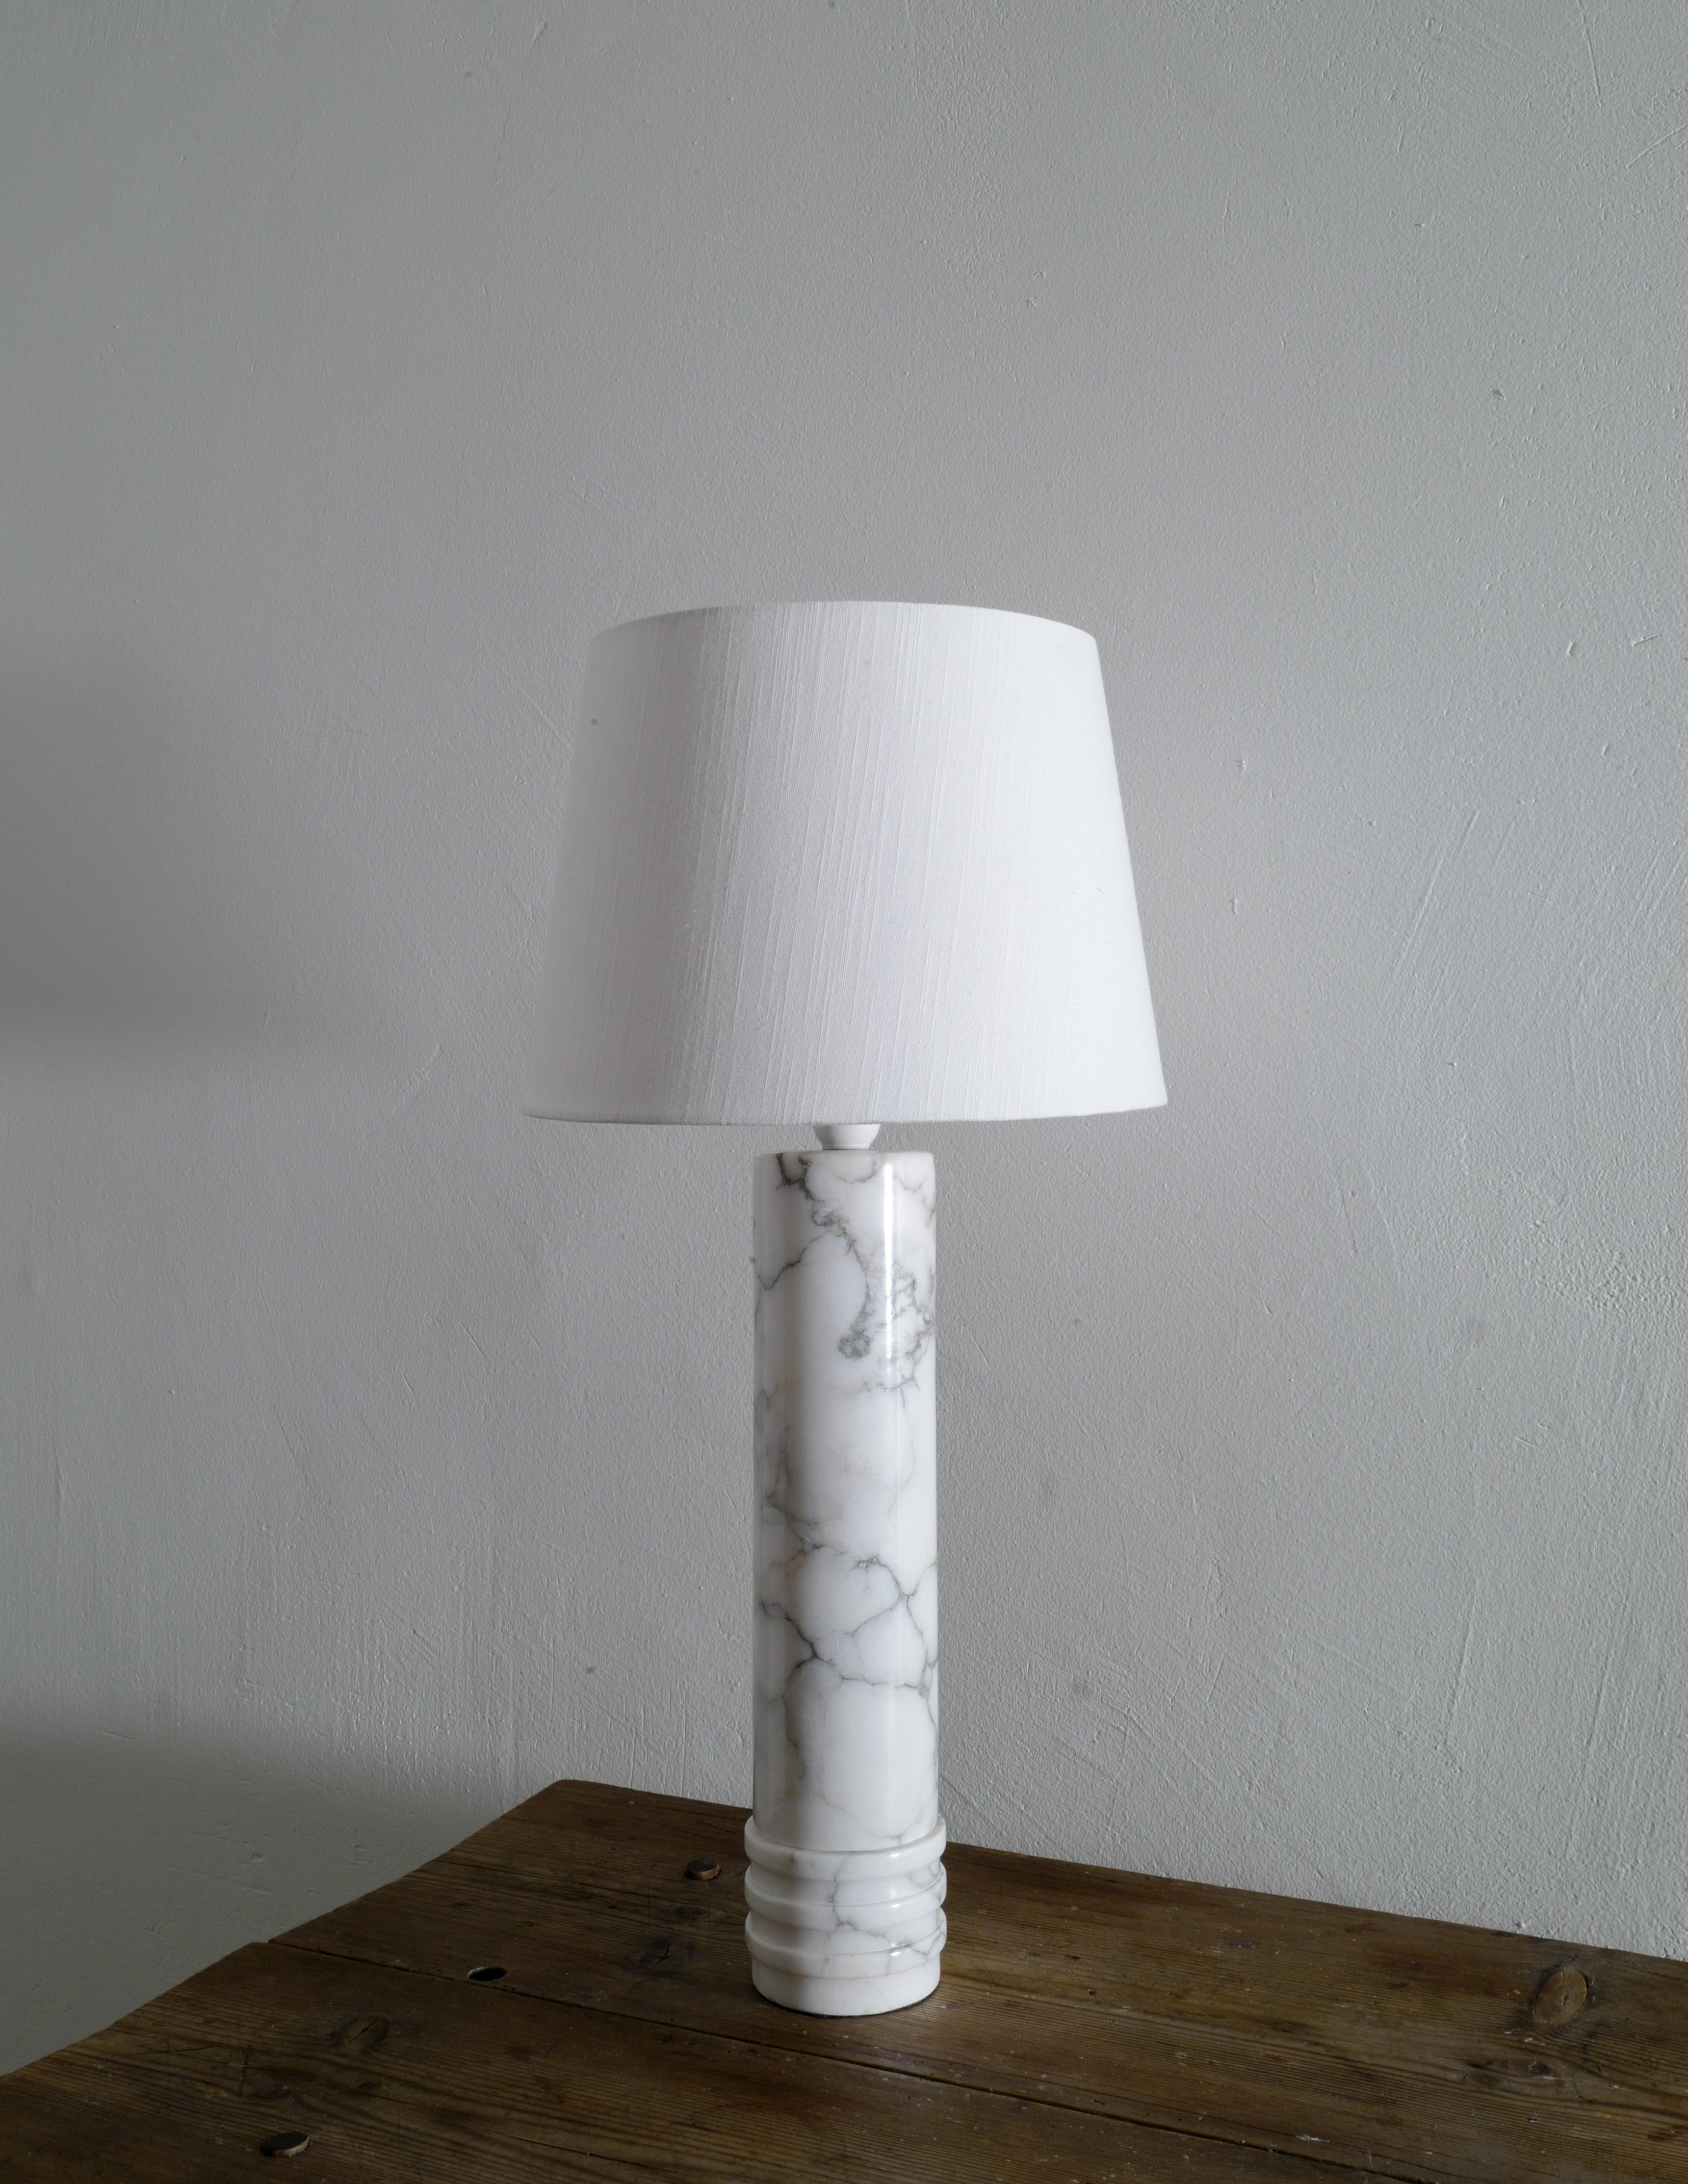 Great example of a rare table lamp in marble or alabaster from the 1960s produced by Bergboms, Sweden.
In good vintage condition with some signs of use. Shade is excluded from the sale.
Measurements are without the shade. Shade is 23 cm tall and